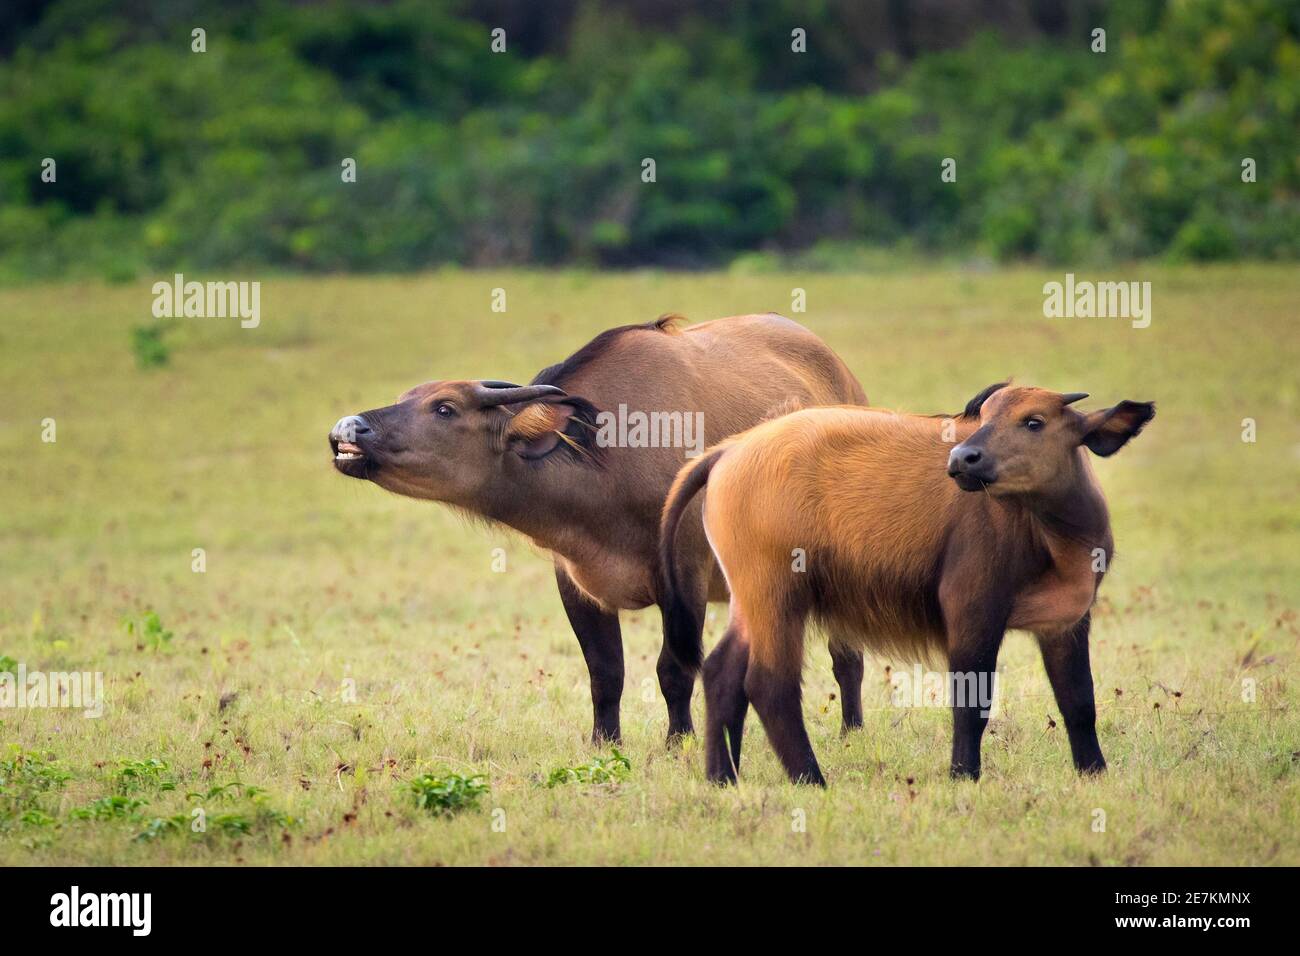 African Forest or Dwarf Buffalo (Syncerus caffer nanus) mother and young, Loango National Park, Gabon, central Africa. Stock Photo